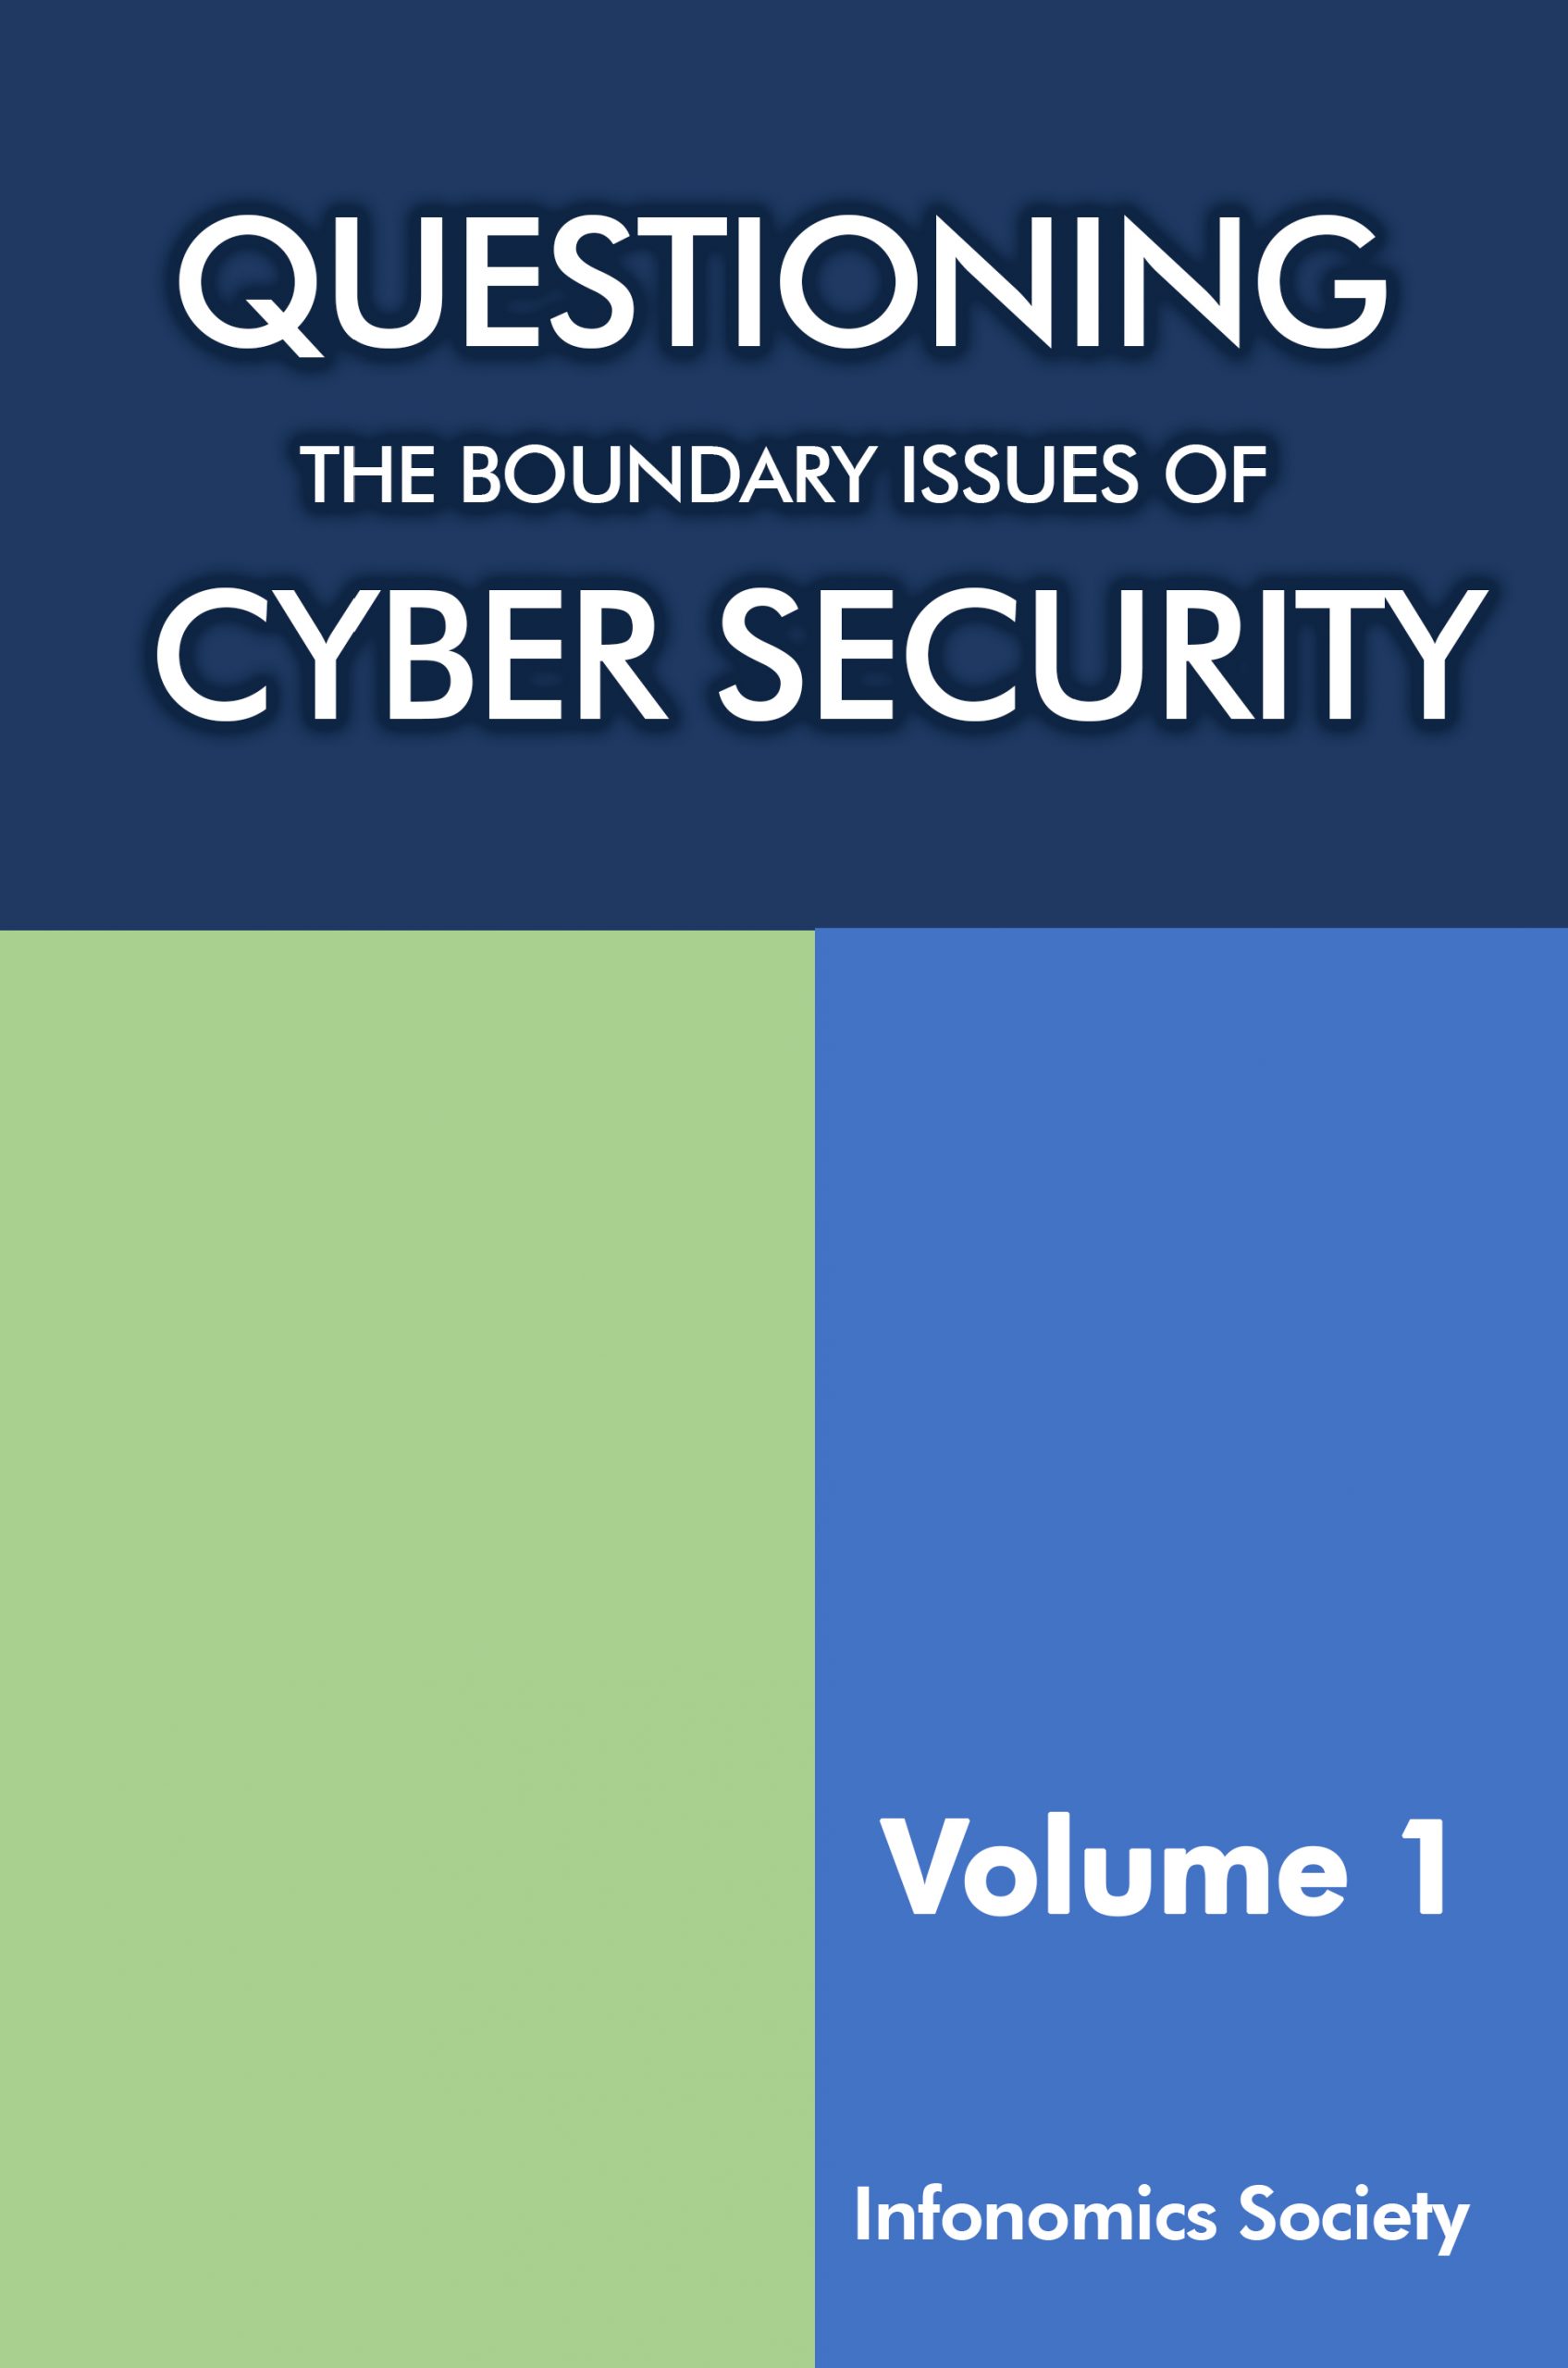 of　Boundary　Issues　Cyber　Security　Society　Volume　Infonomics　Questioning　the